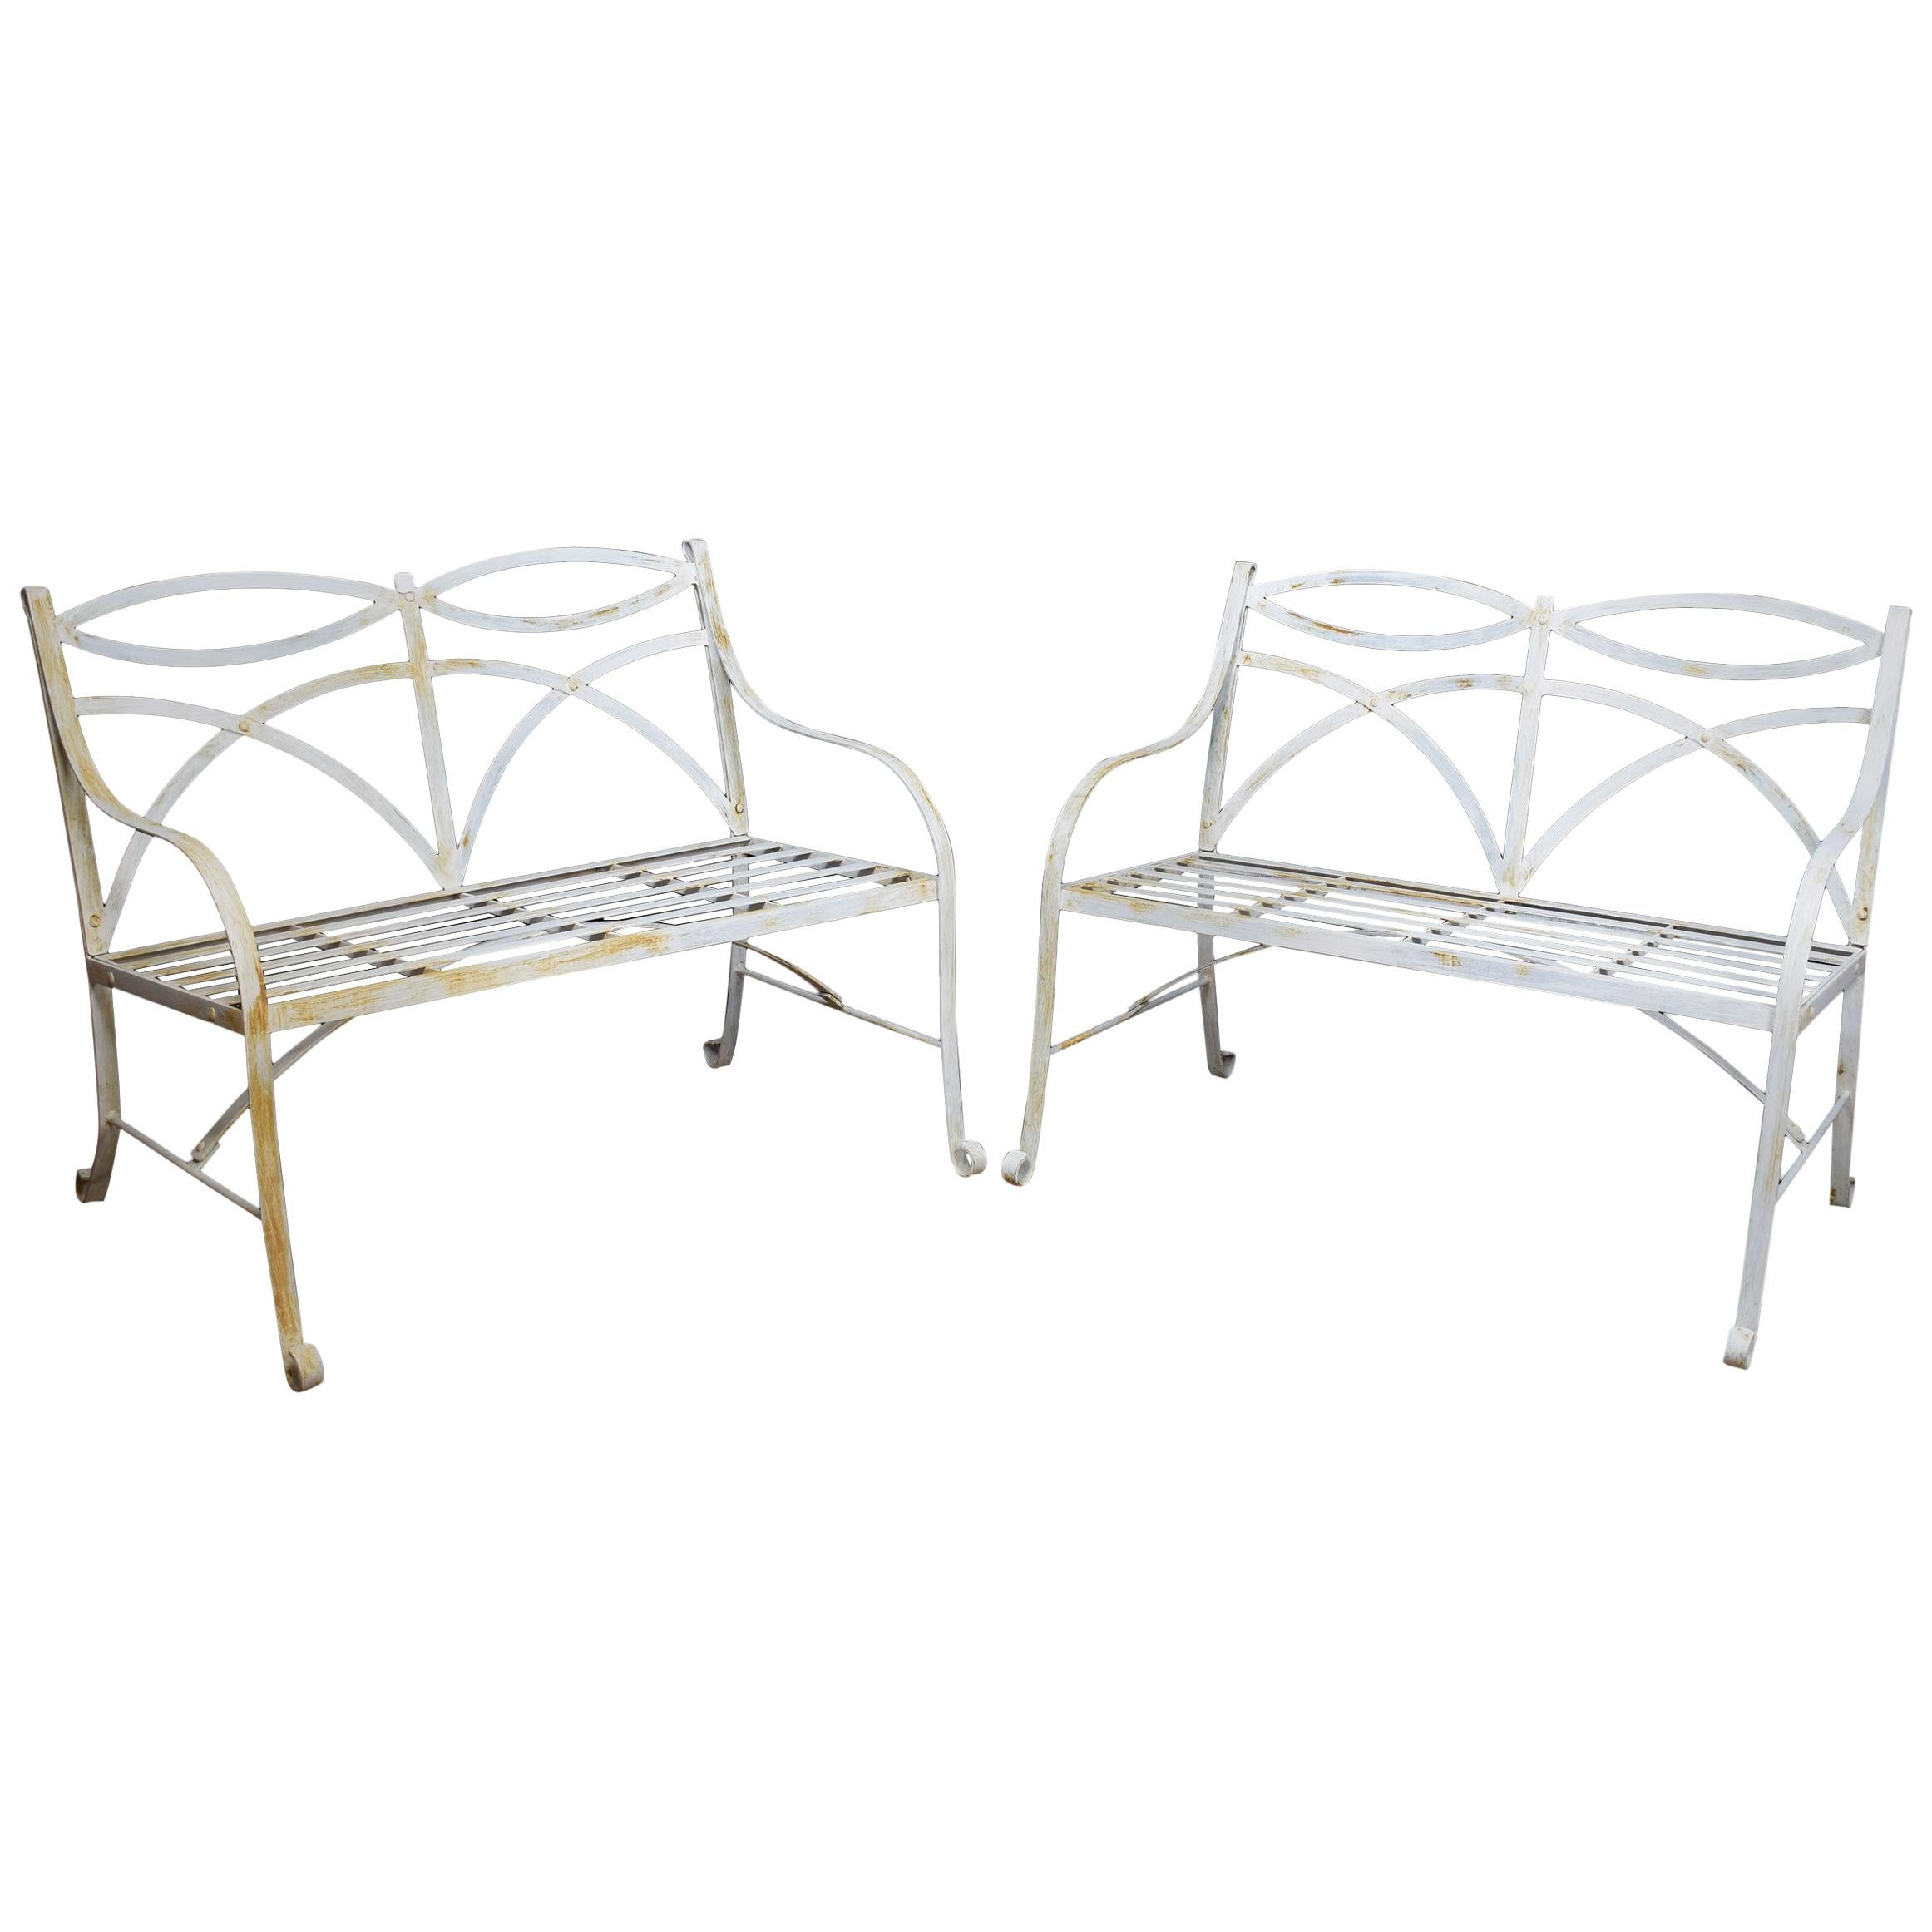 Pair of Regency Style White Painted Metal Garden Benches